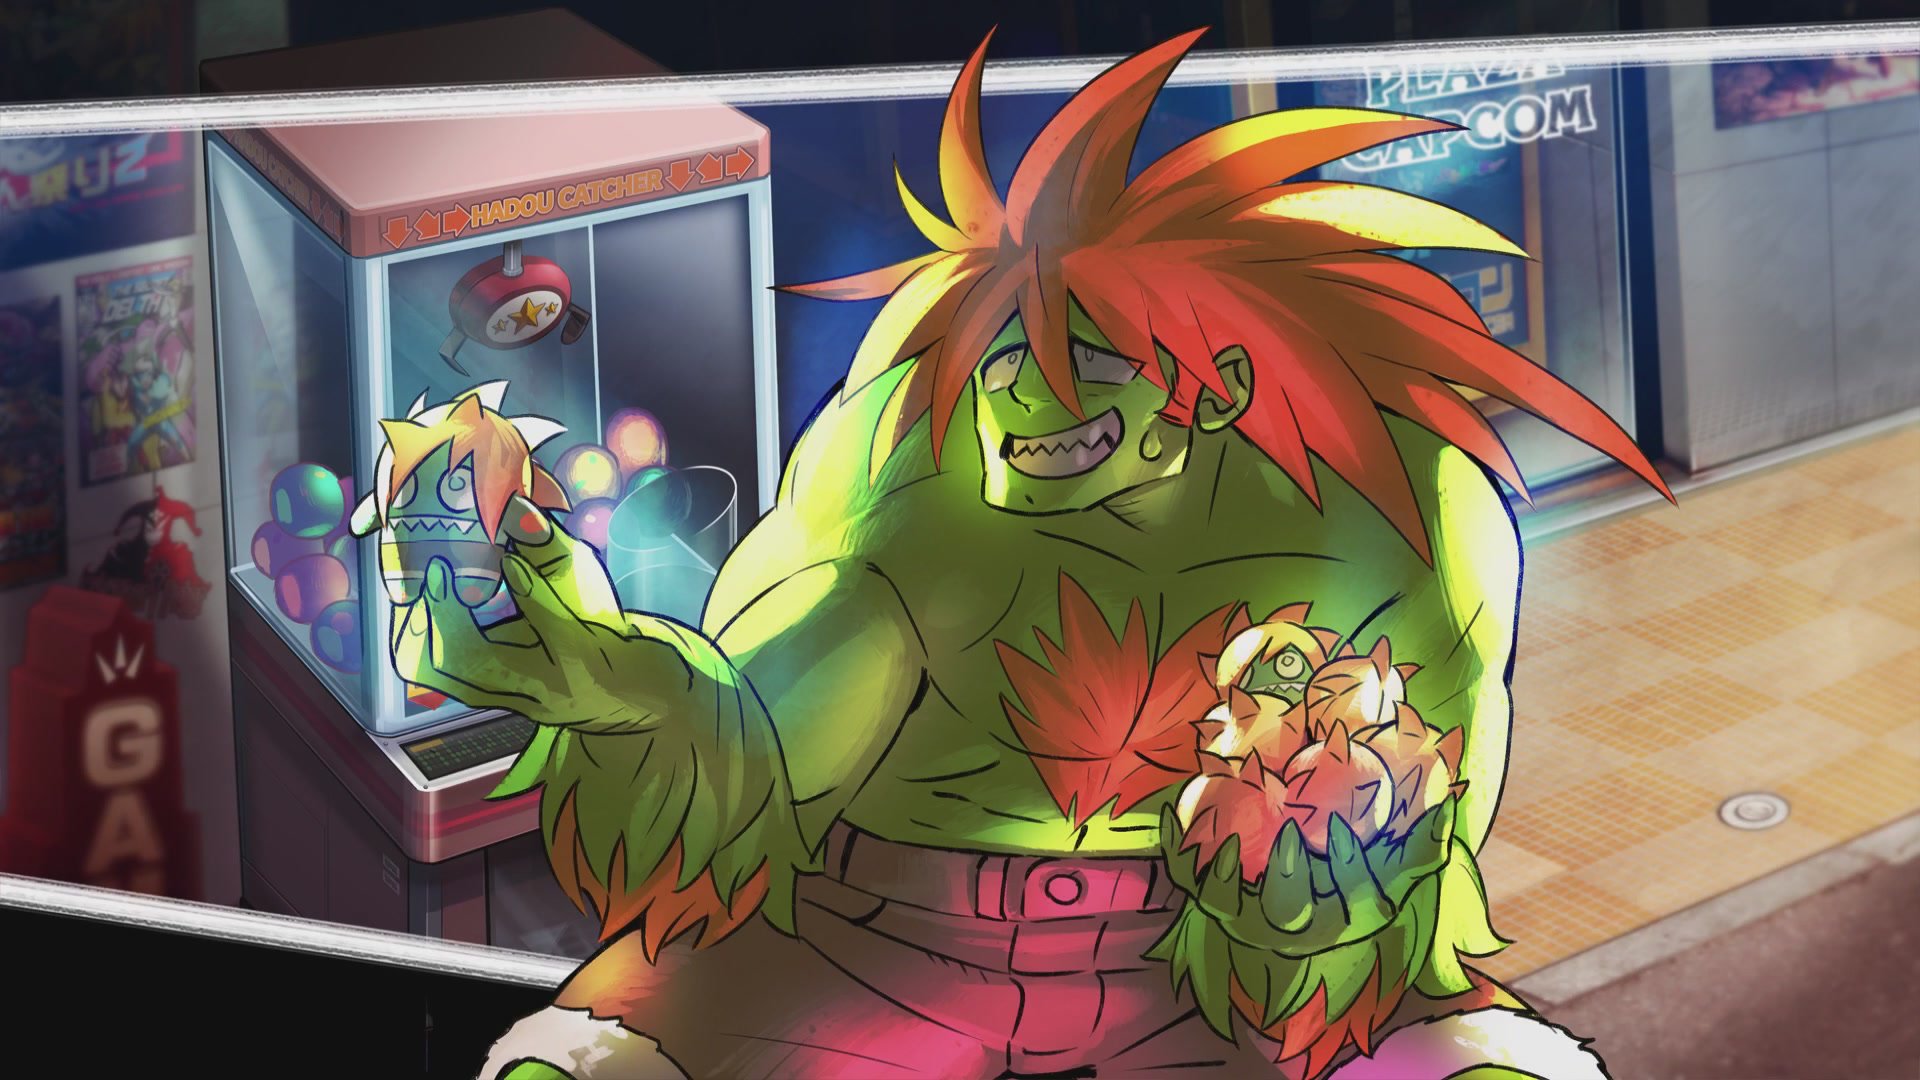 Street Fighter 6 cute Blanka-chan Doll finally appears at